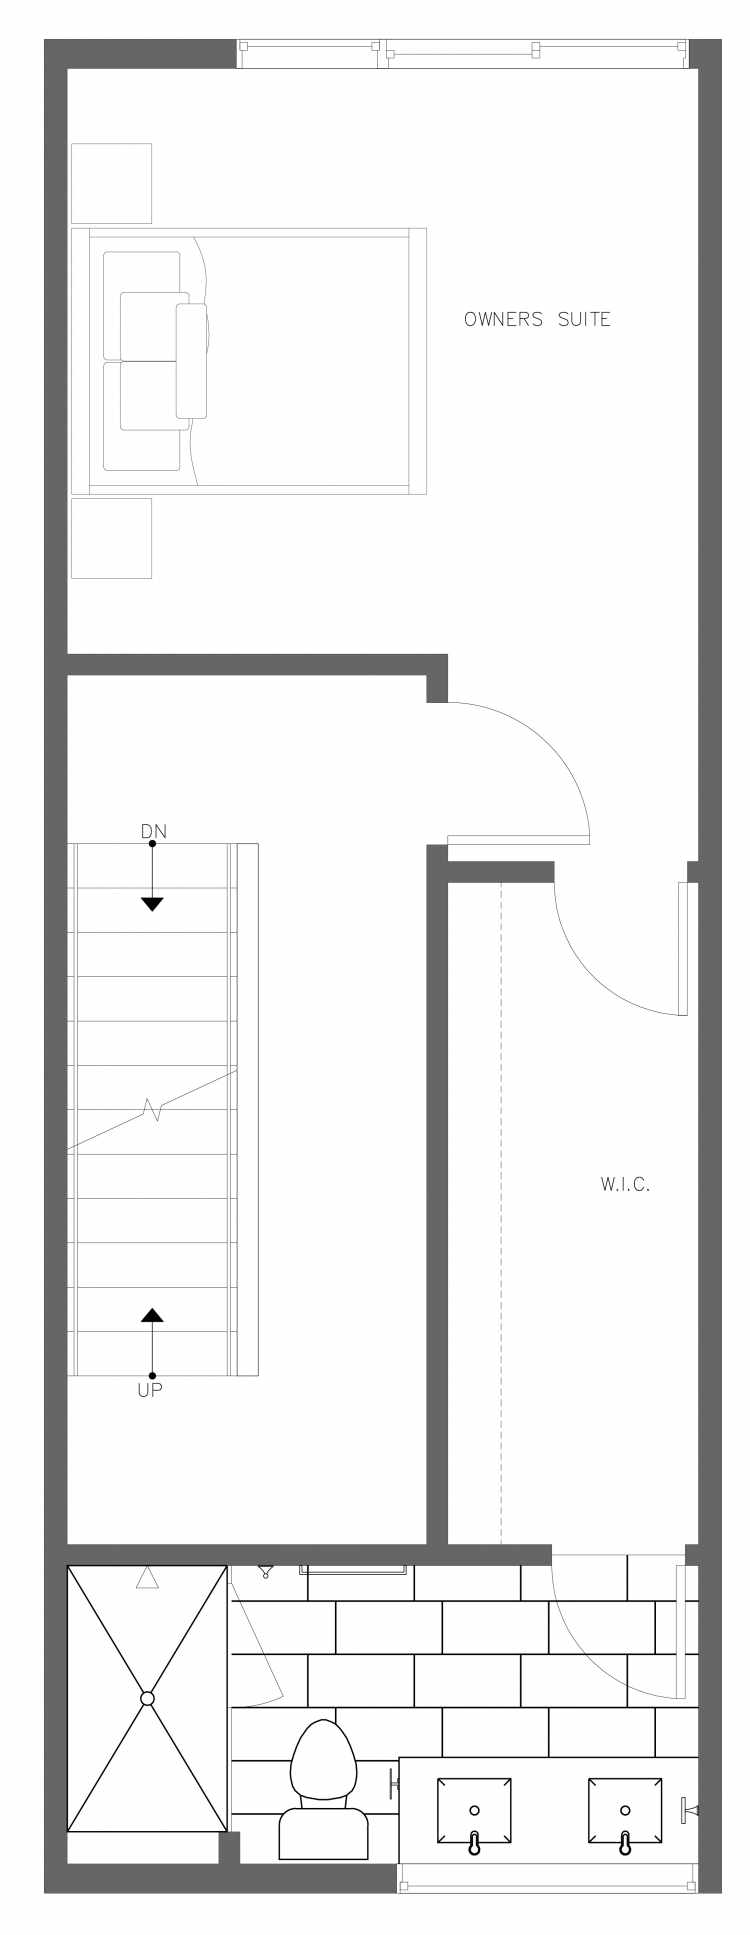 Third Floor Plan of 3406C 15th Ave W, One of the Arlo Townhomes in North Queen Anne